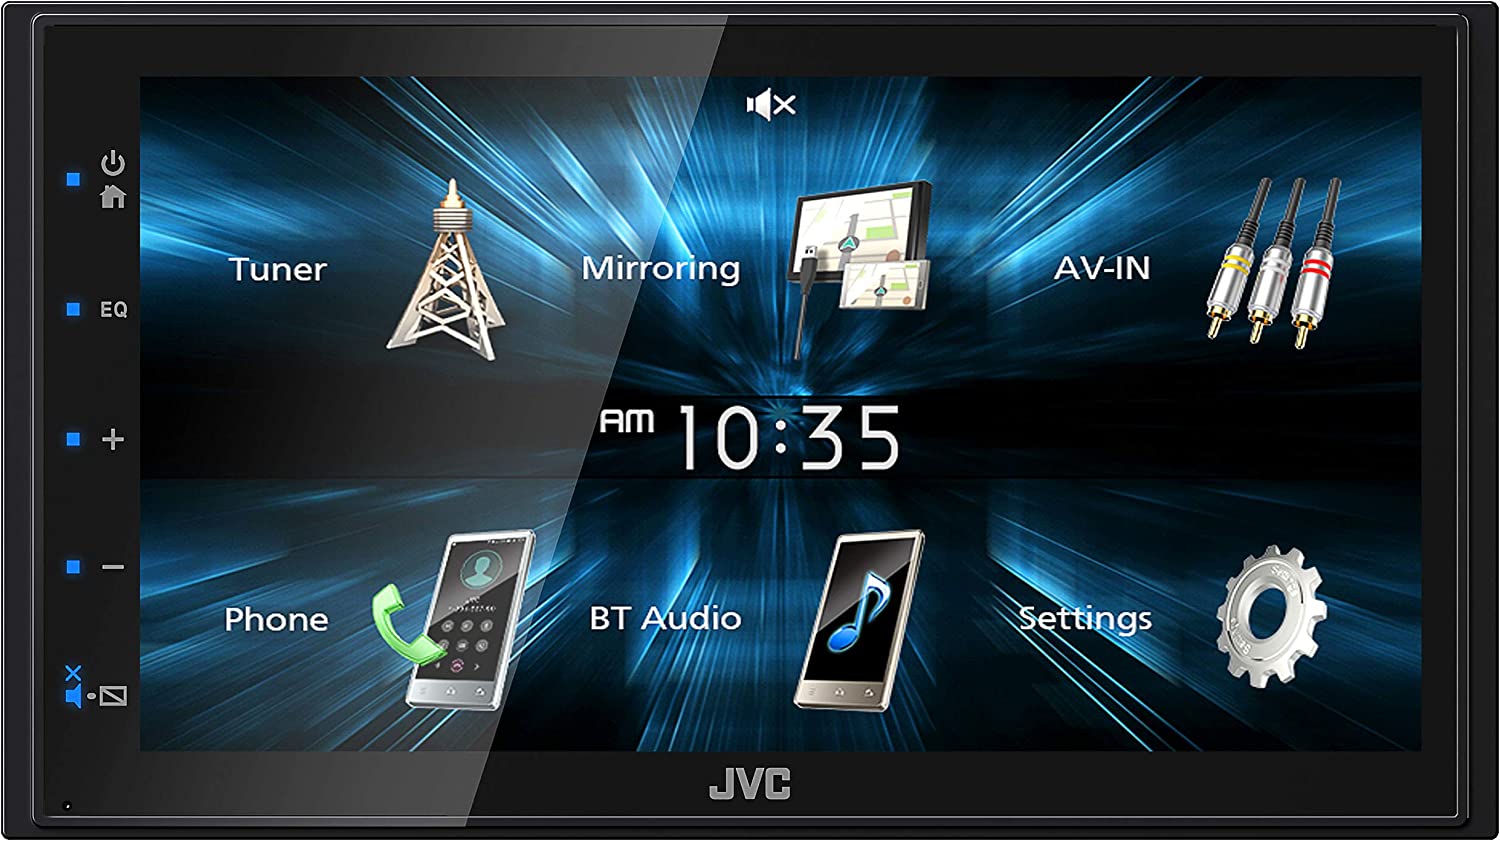 JVC KW-M150BT Bluetooth Car Stereo Receiver with USB Port 6.75" Display Radio MP3 Player Double DIN + Absolute Camera